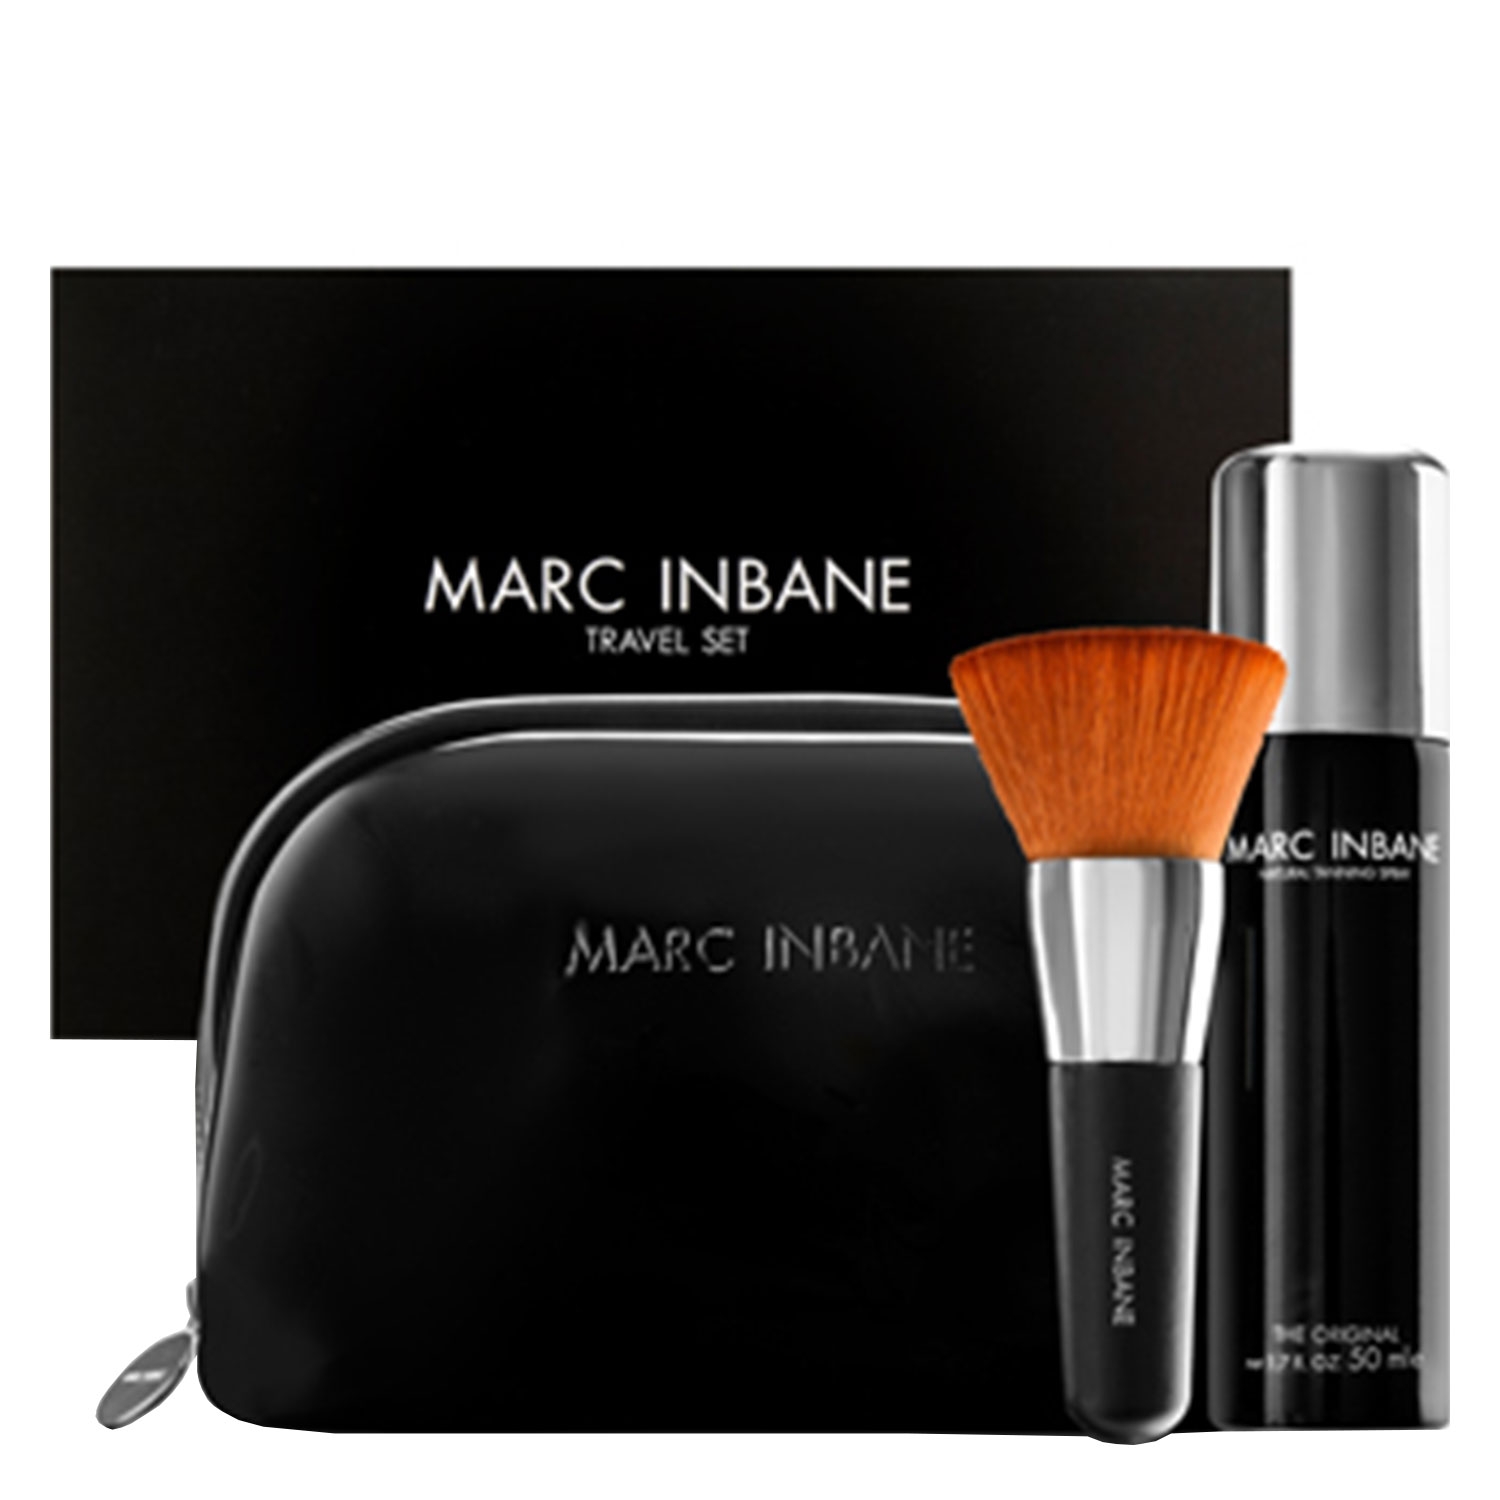 Product image from Marc Inbane - Luxe Travel Set